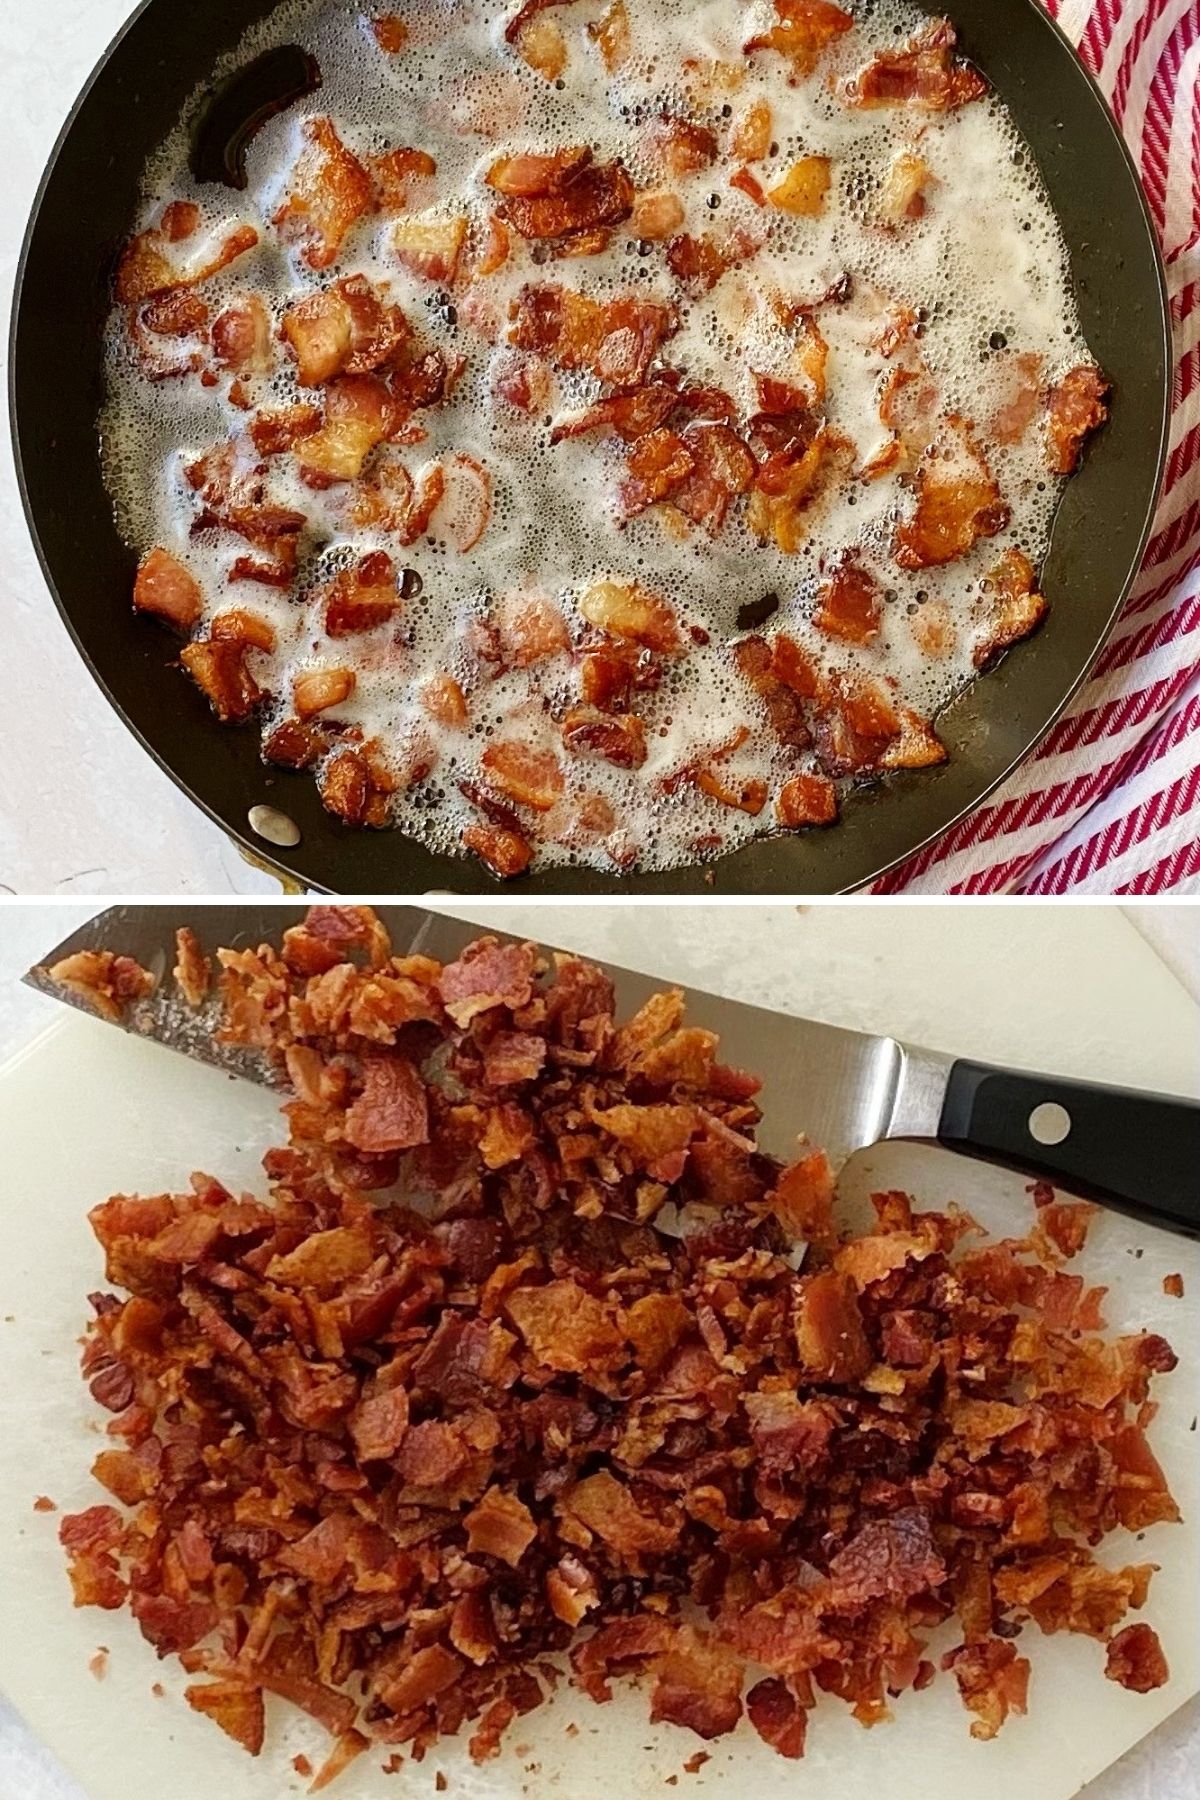 cooking and chopping bacon for dip.